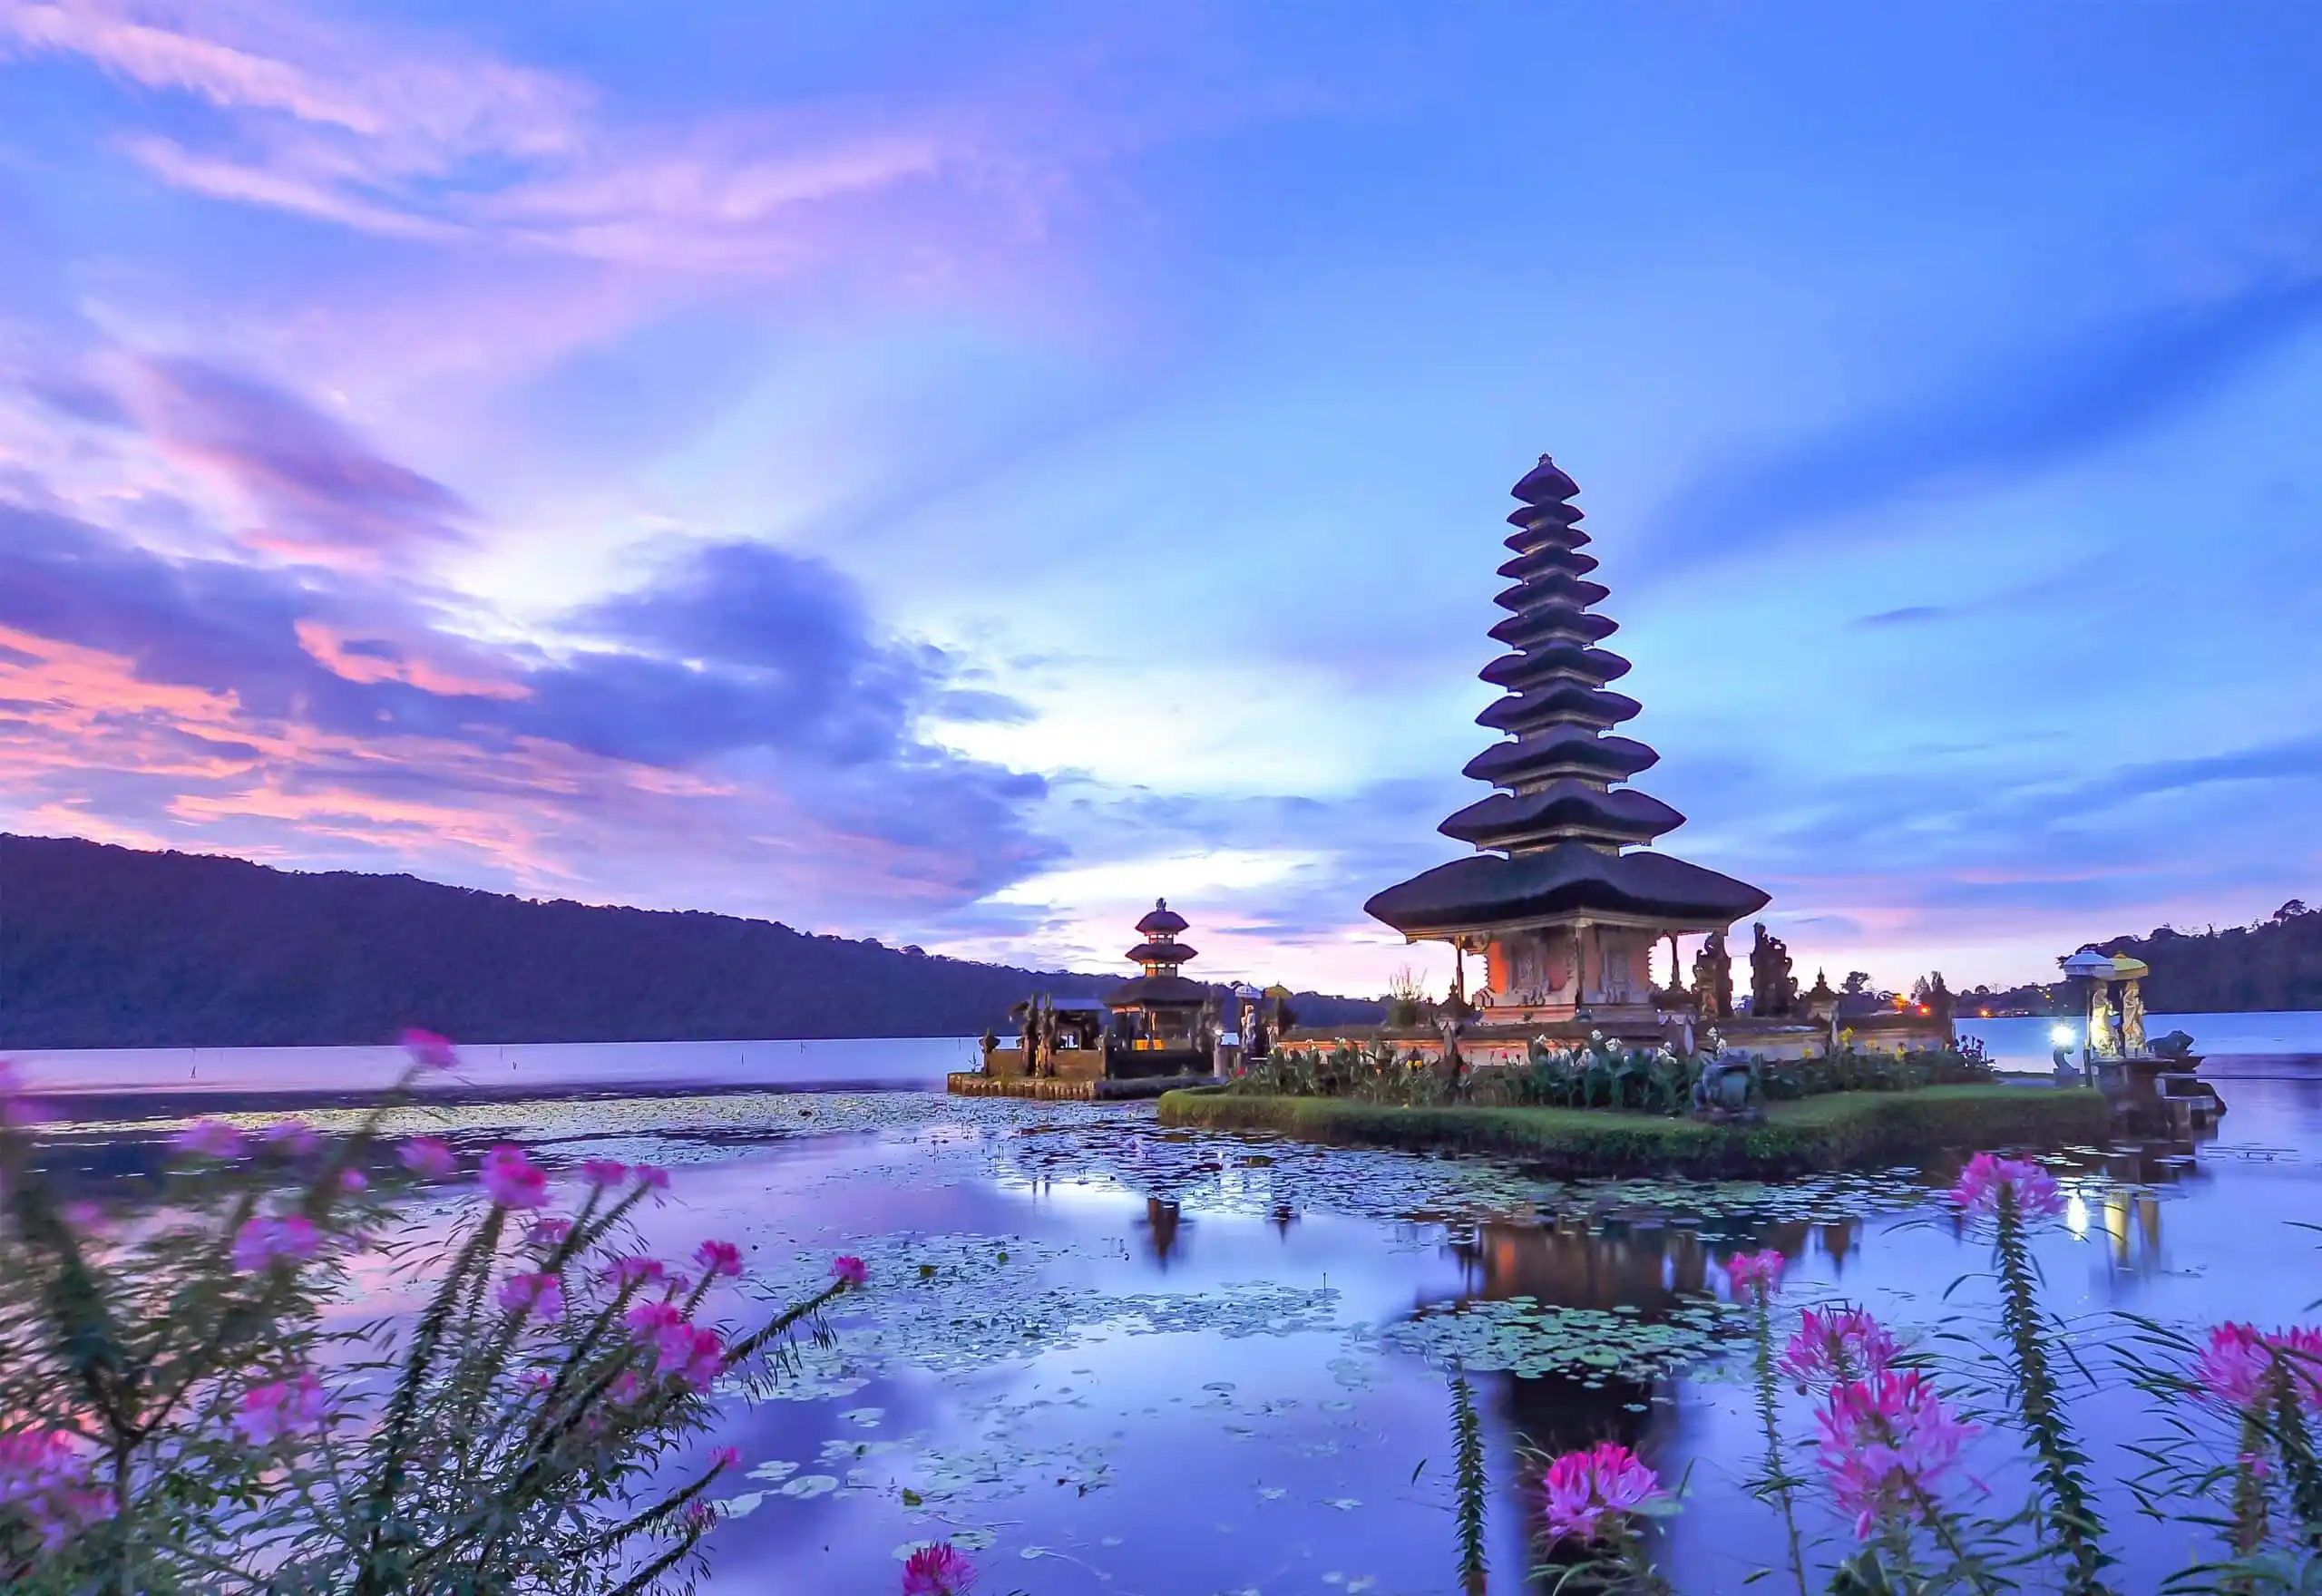 Safety Training Courses in Bali